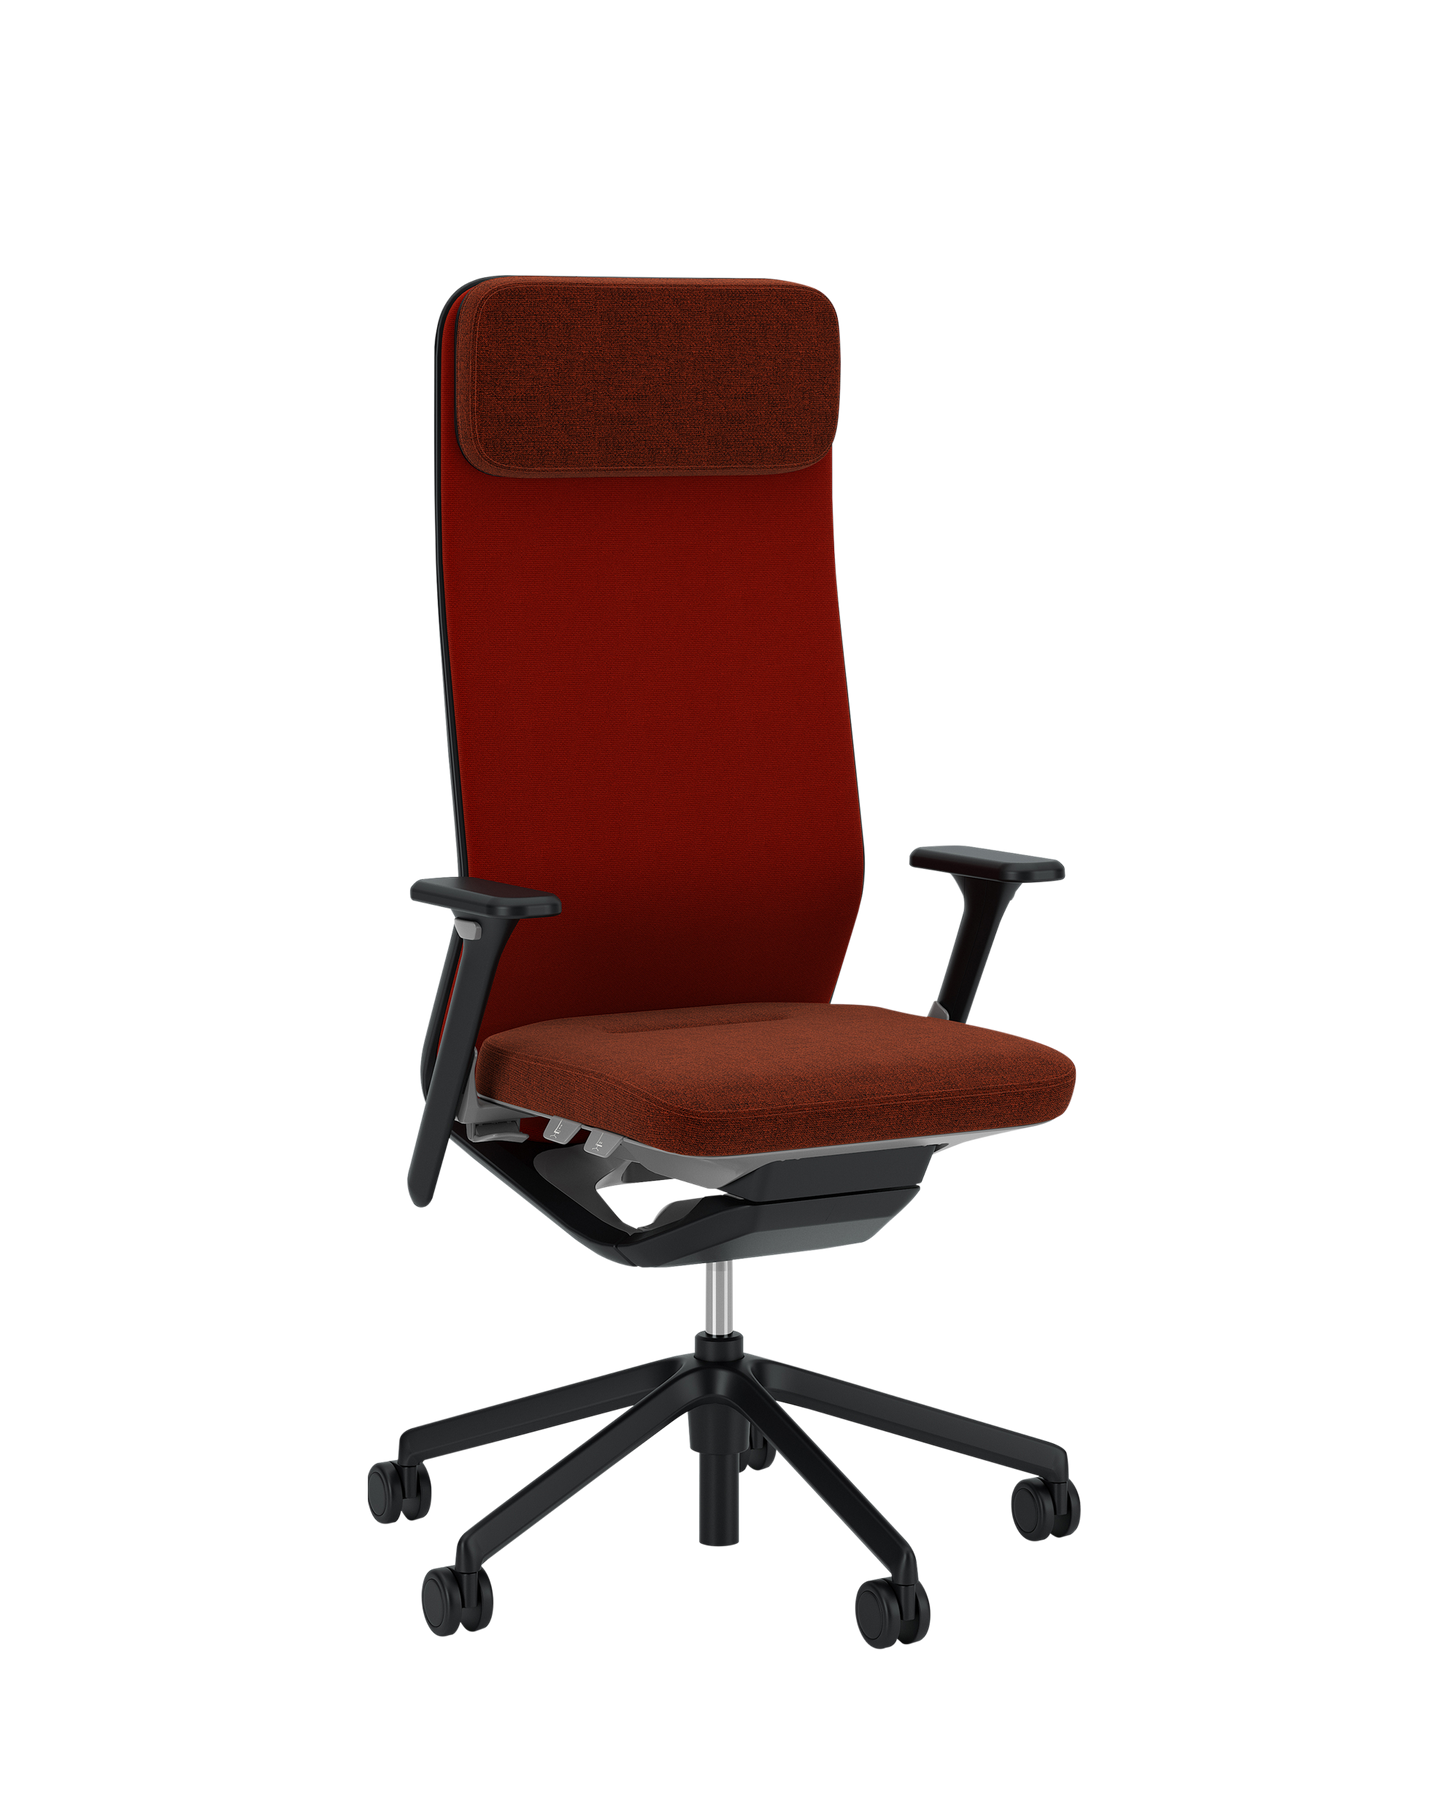 YouTEAM High Back Chair